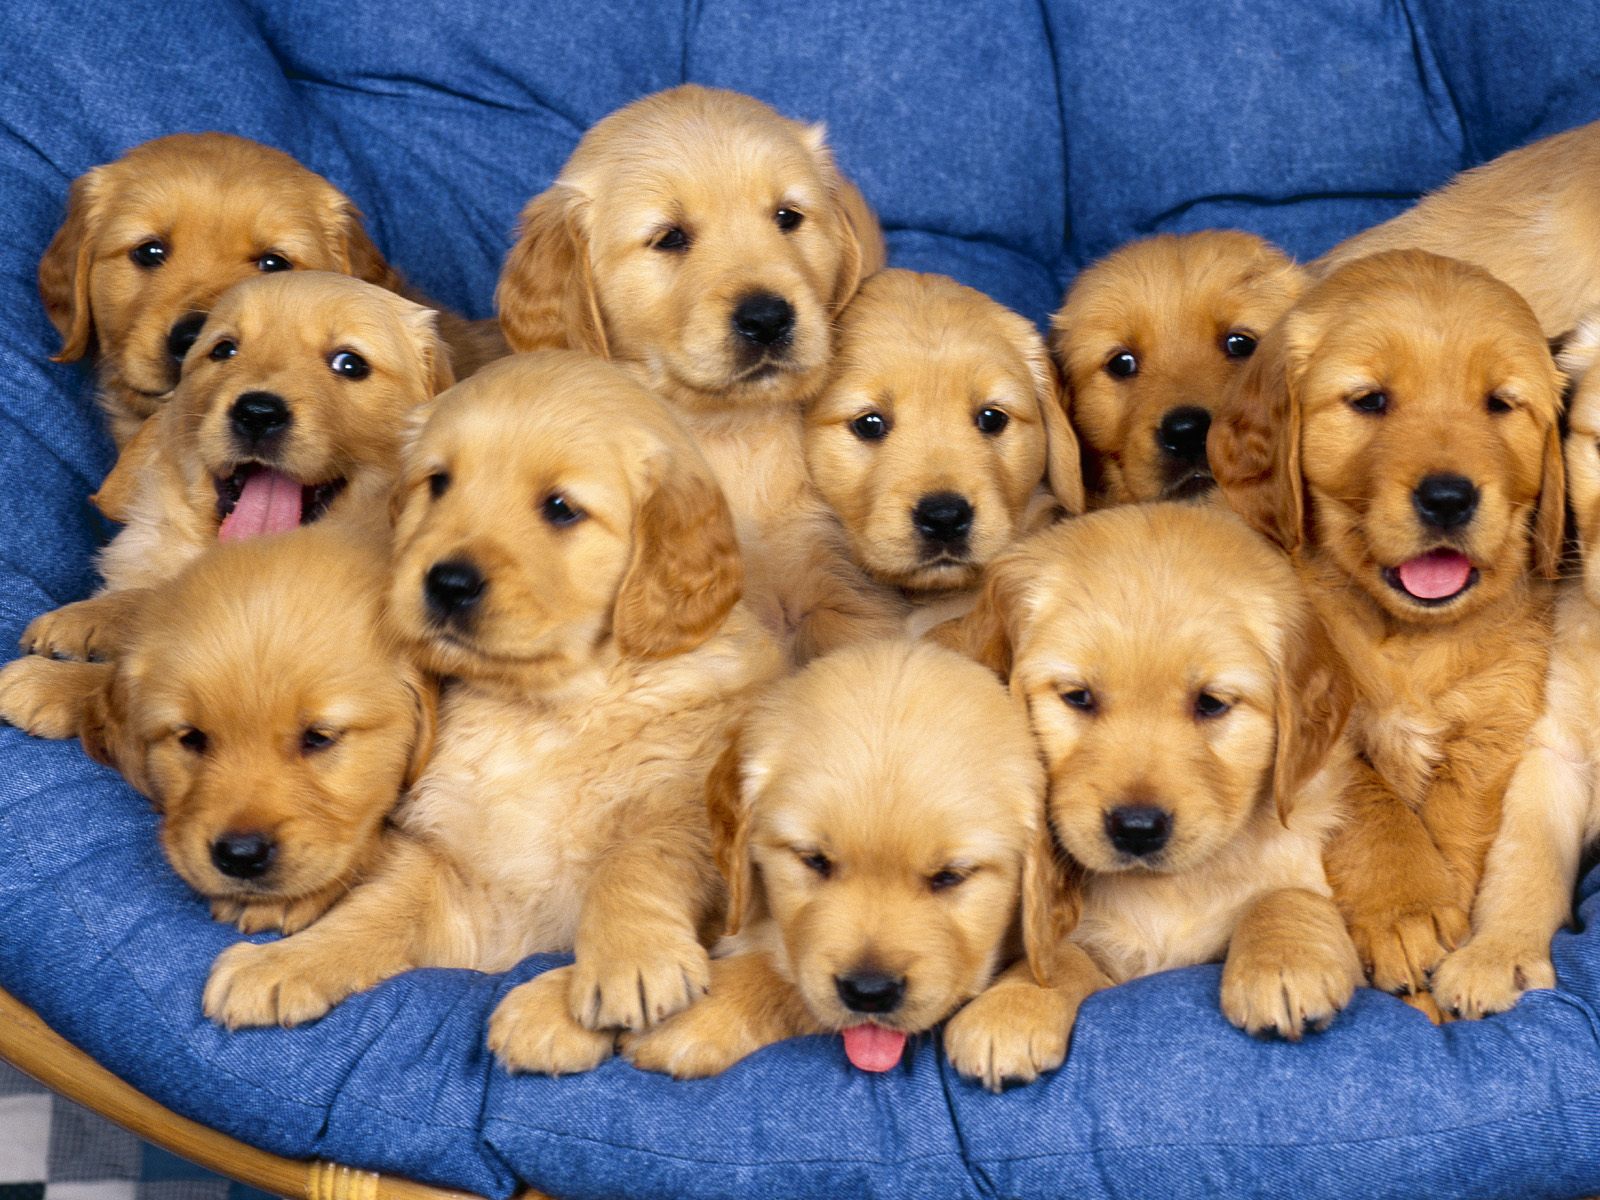 Puppy Dogs Hd Desktop Images Wallpapers | Hasnat wallpapers, Free